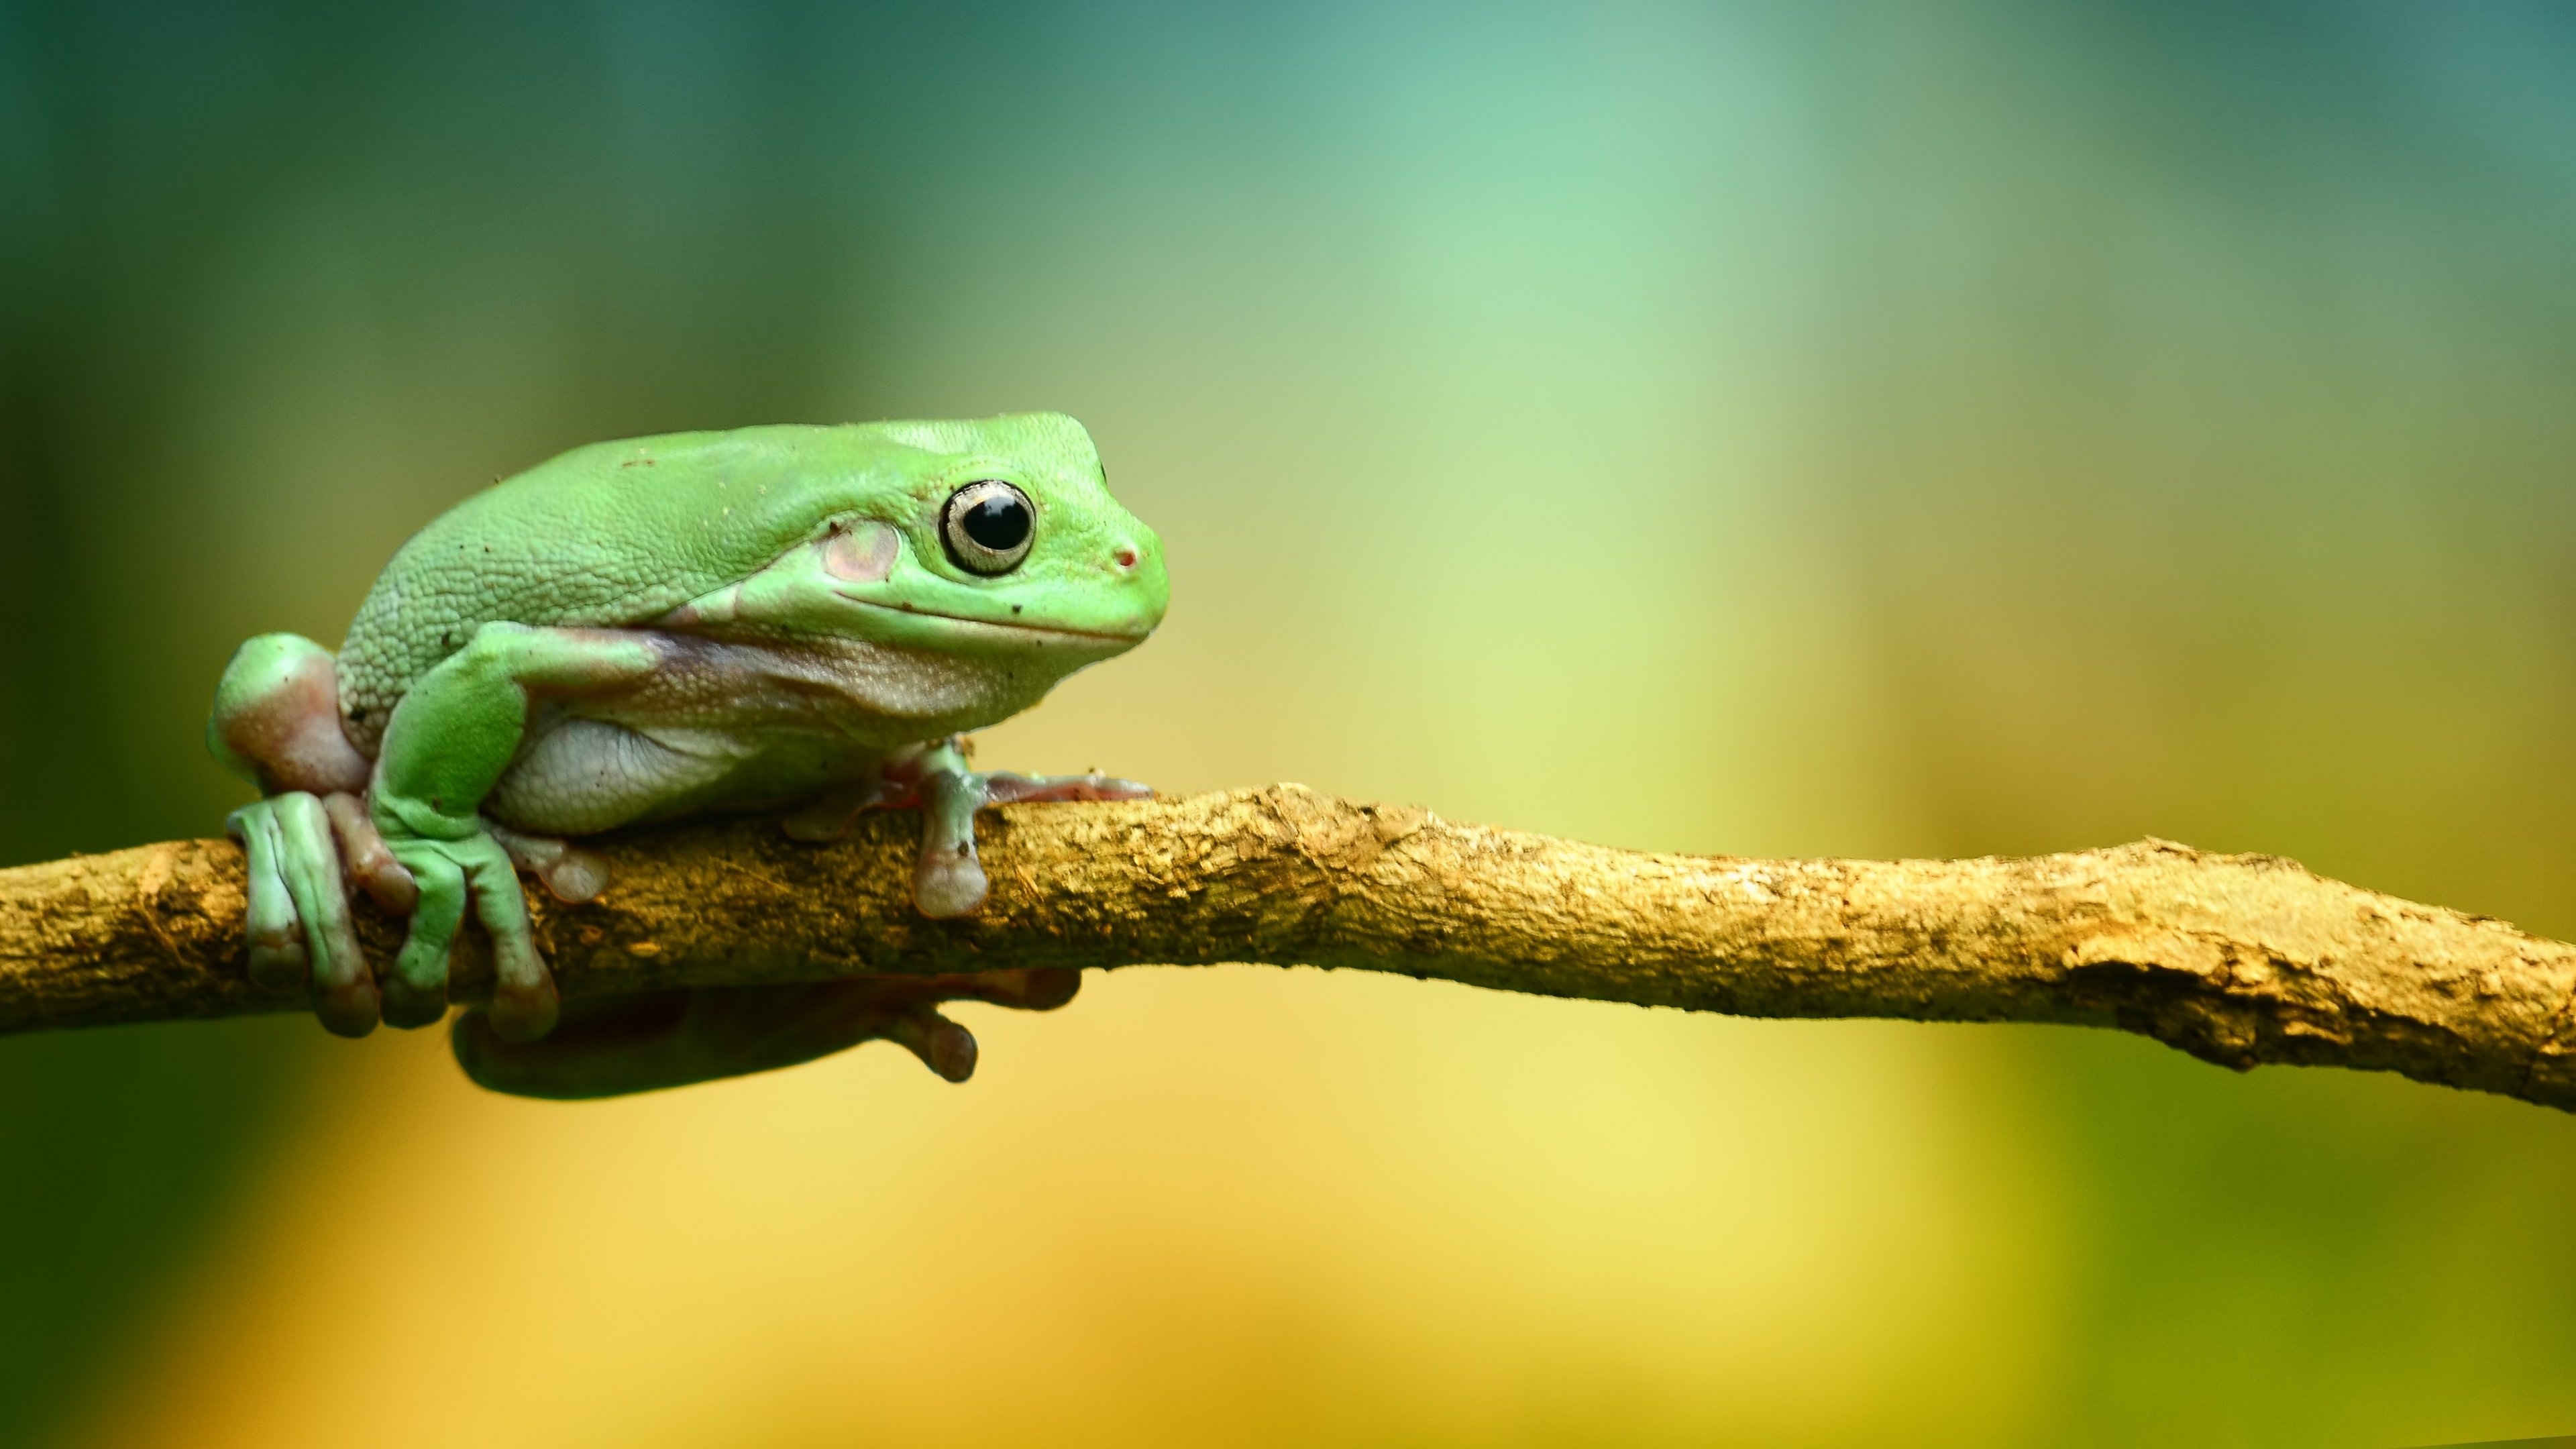 Frog wallpapers, Animal backgrounds, Wallpaper collection, Nature-themed, 3840x2160 4K Desktop